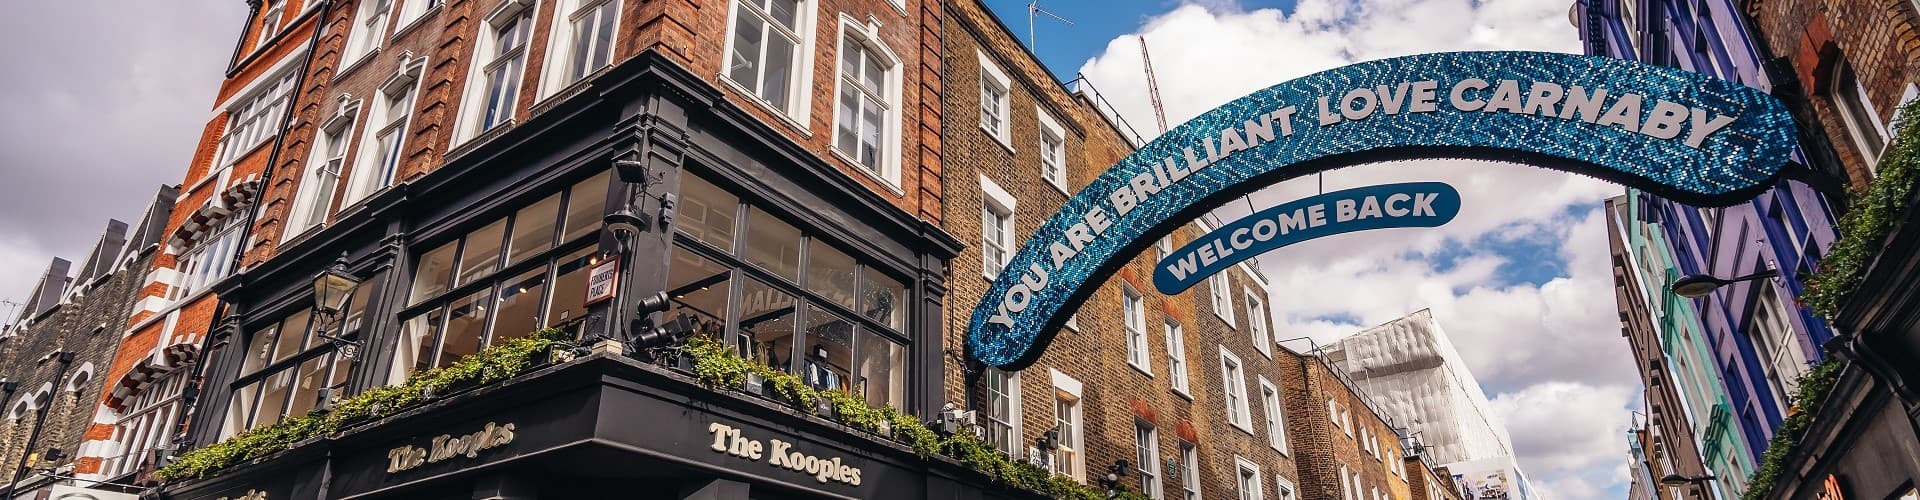 TheUltimateGuideToVisitingCarnabyStreetBanner